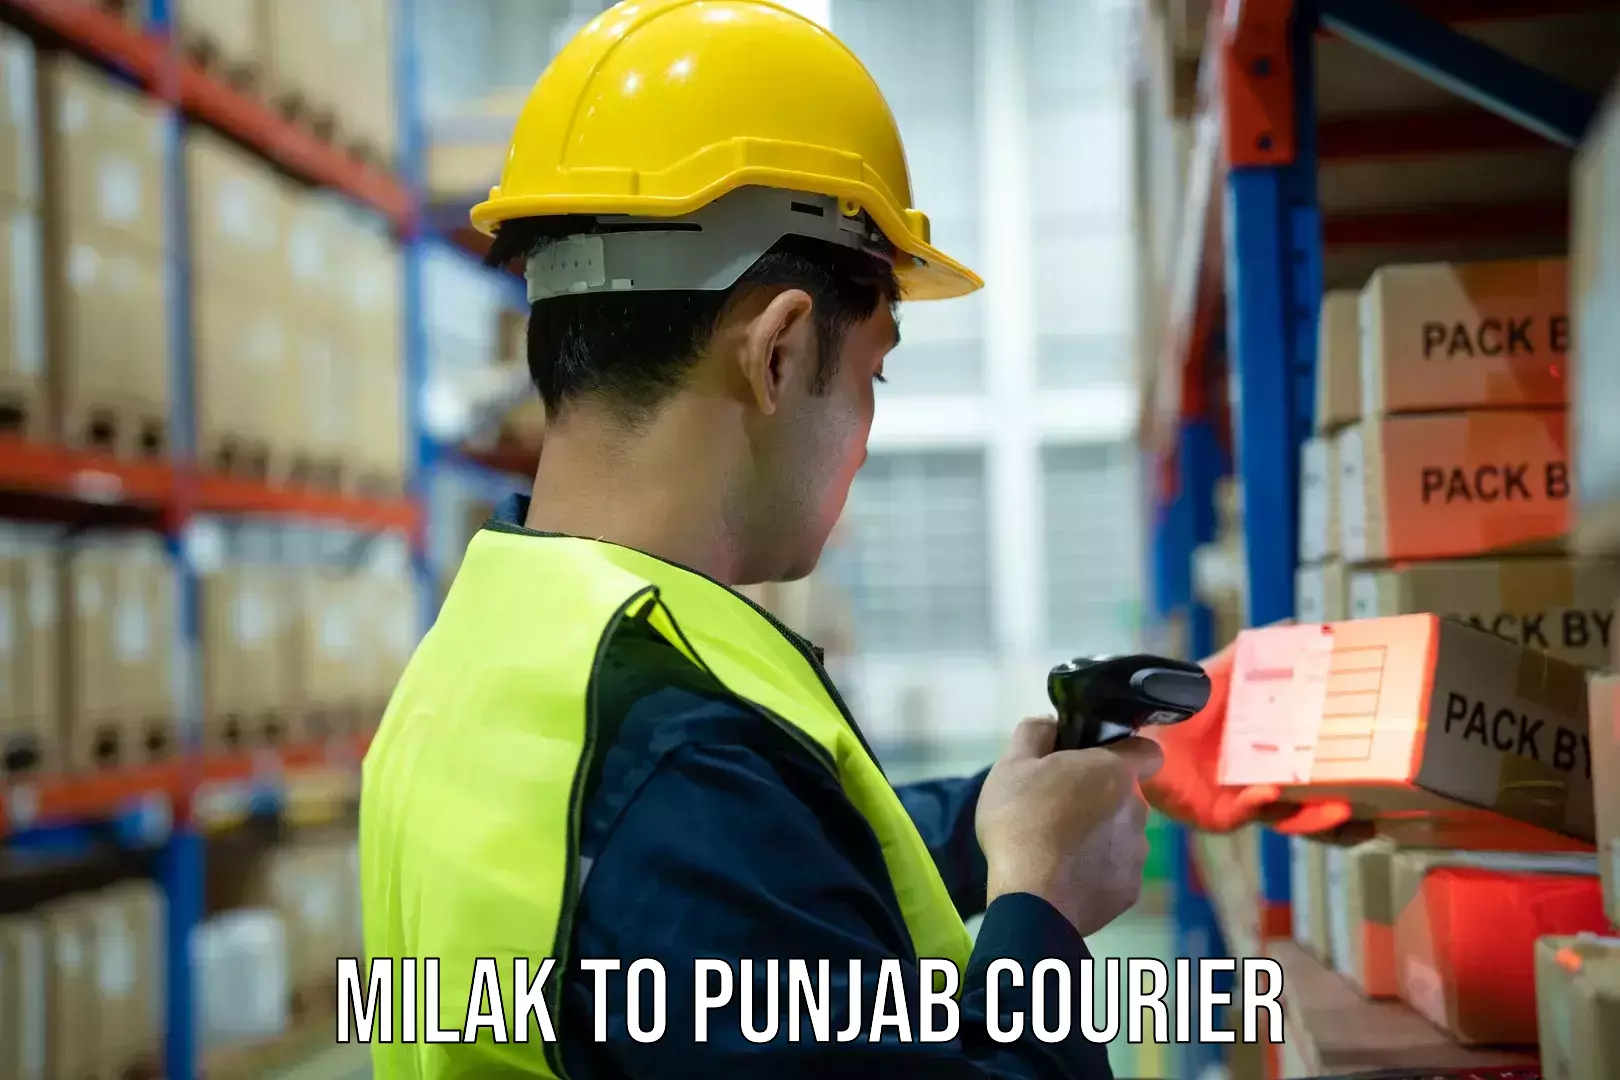 Next-day delivery options Milak to Punjab